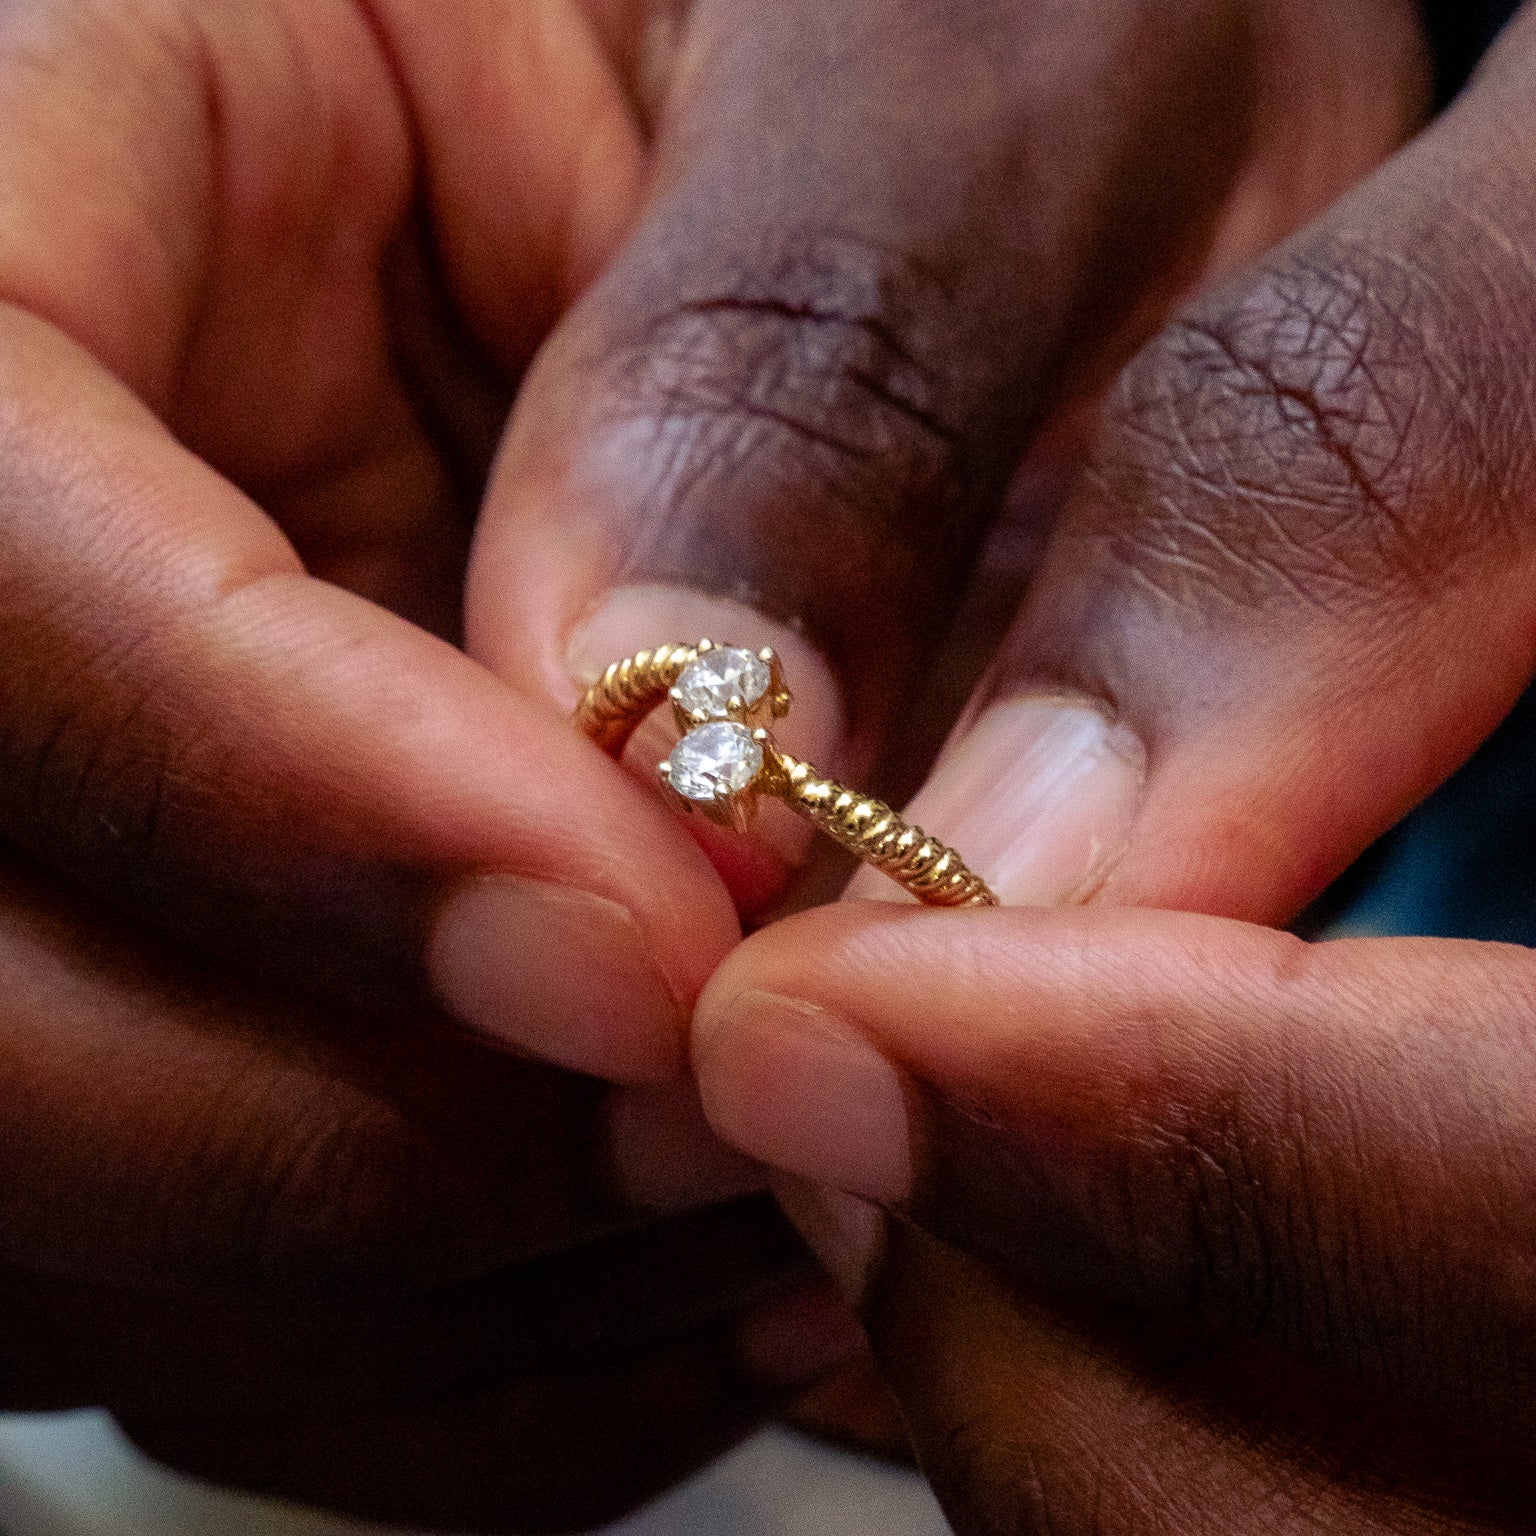 Blog: How to buy a diamond ring online without getting ripped off